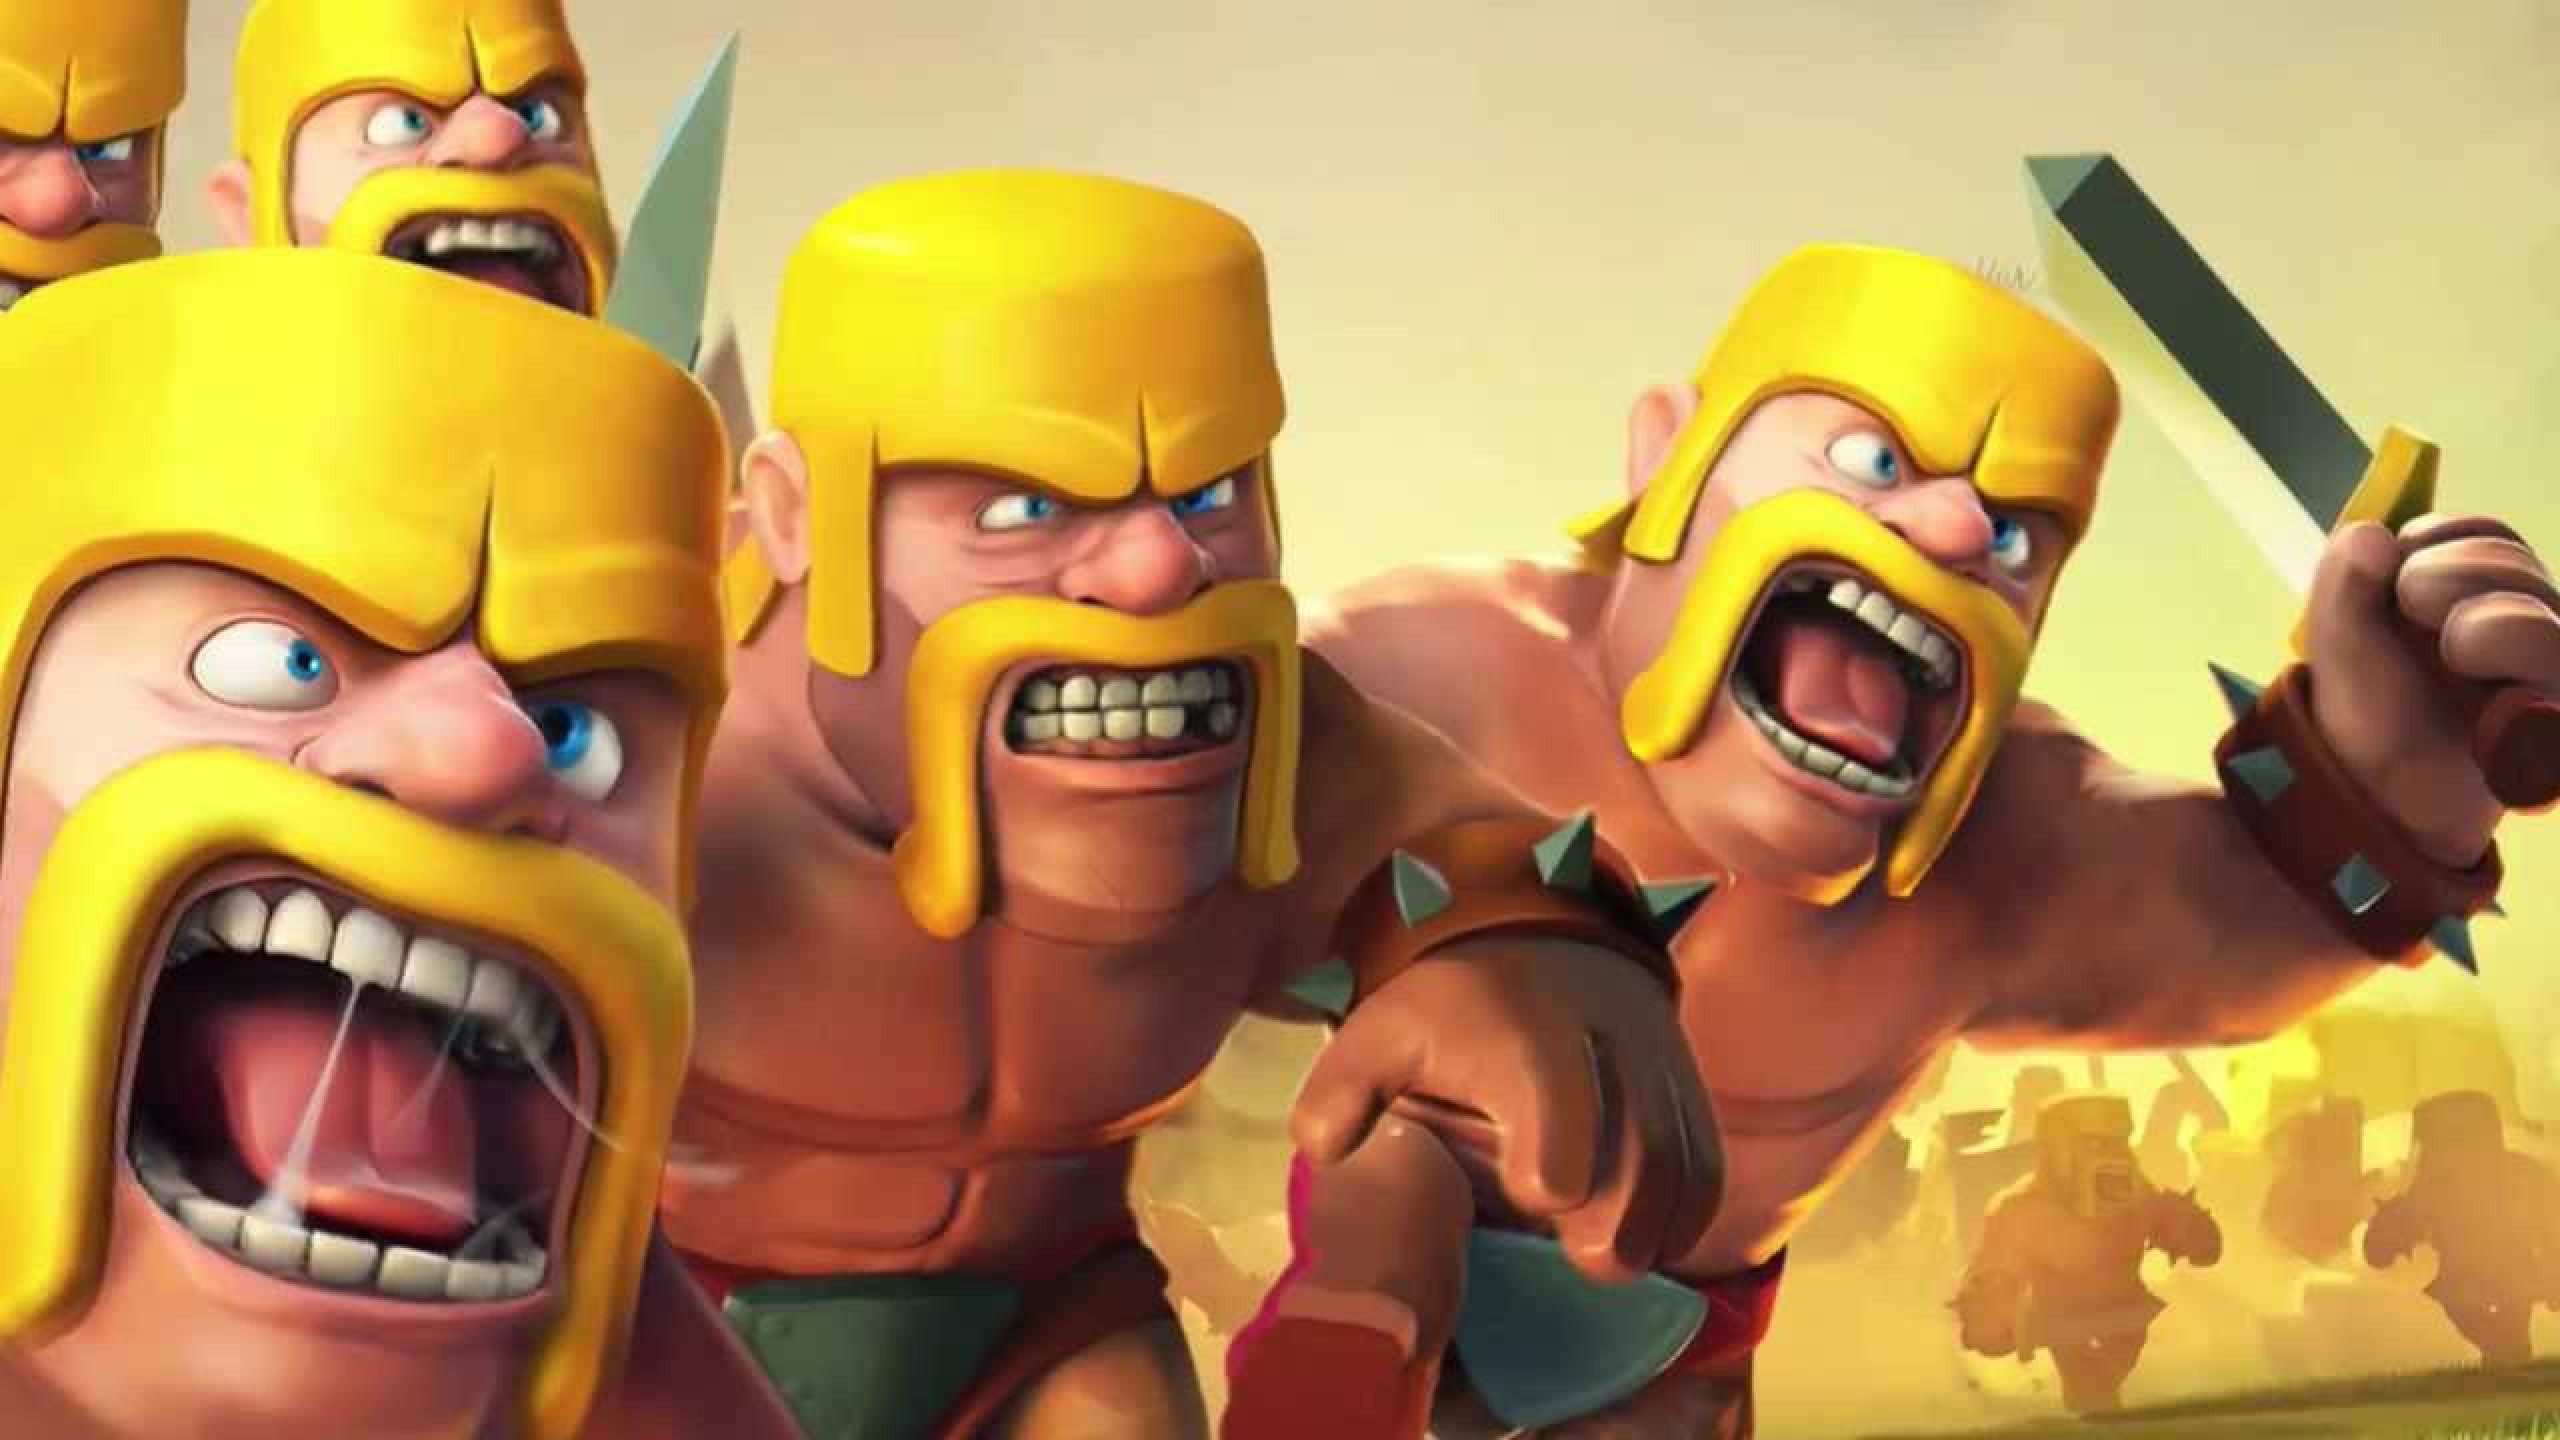 Clash of Clans Backgrounds Free download 